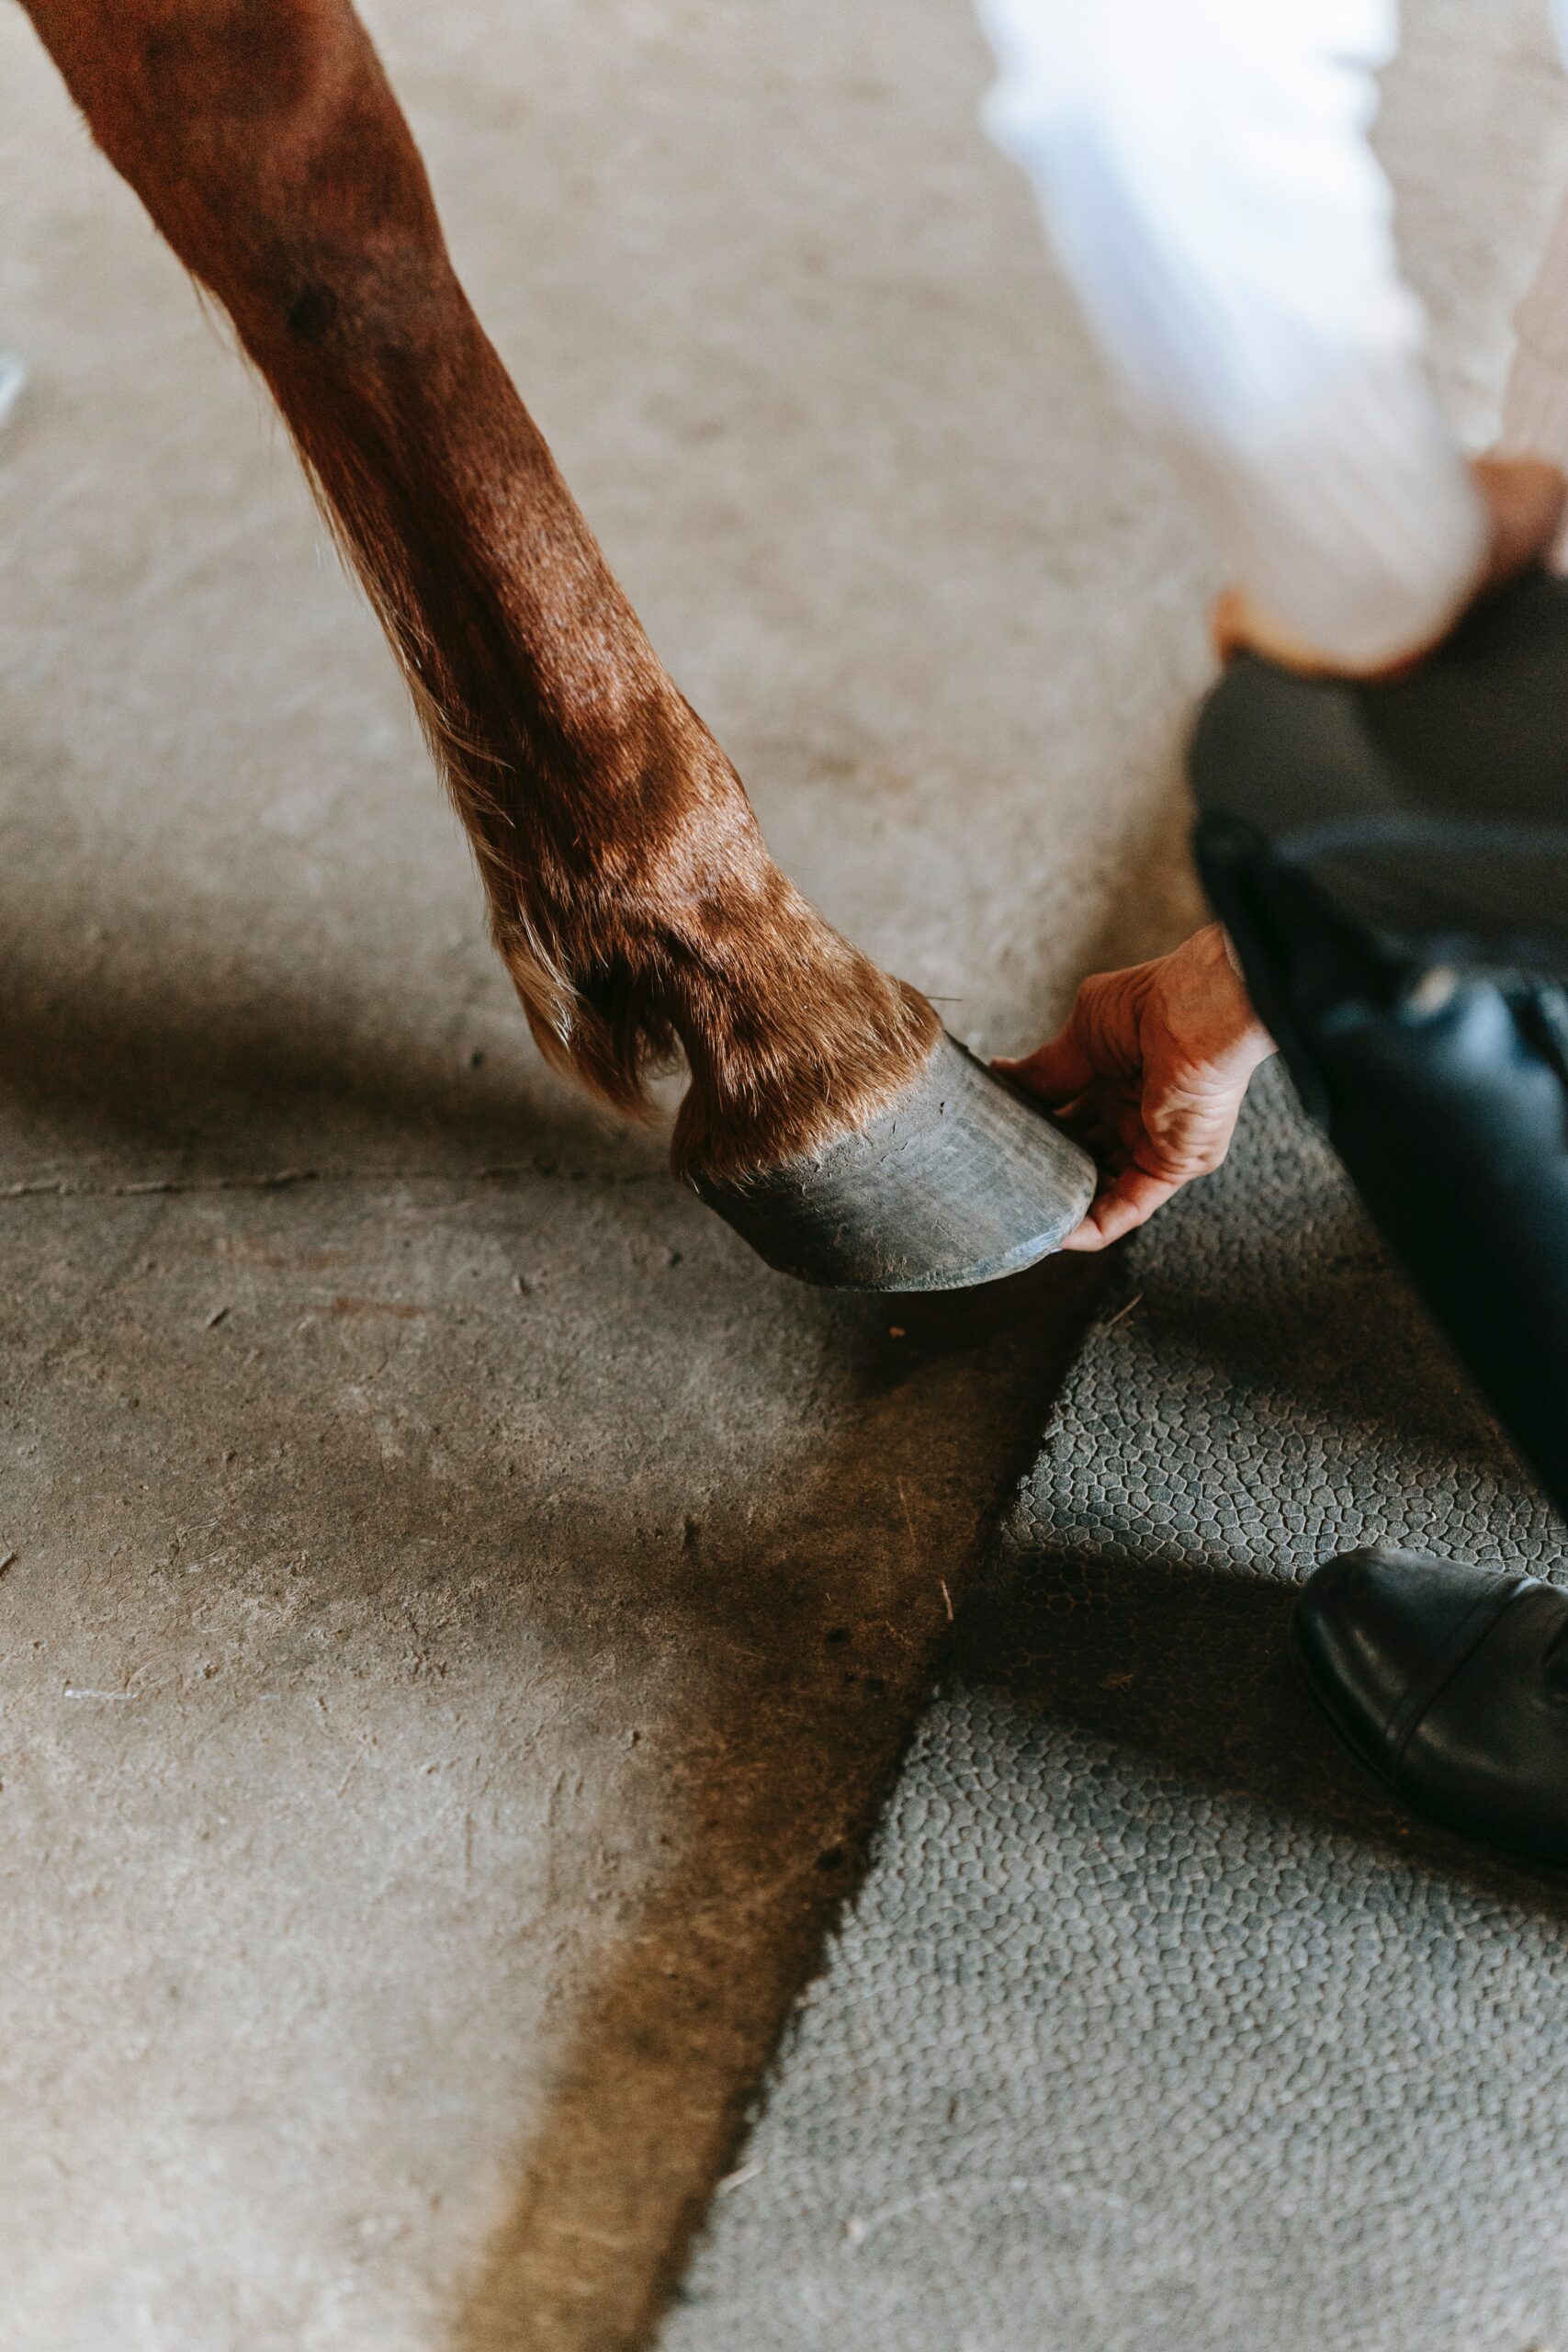 Why Do Horses Rub Their Hooves on the Ground?